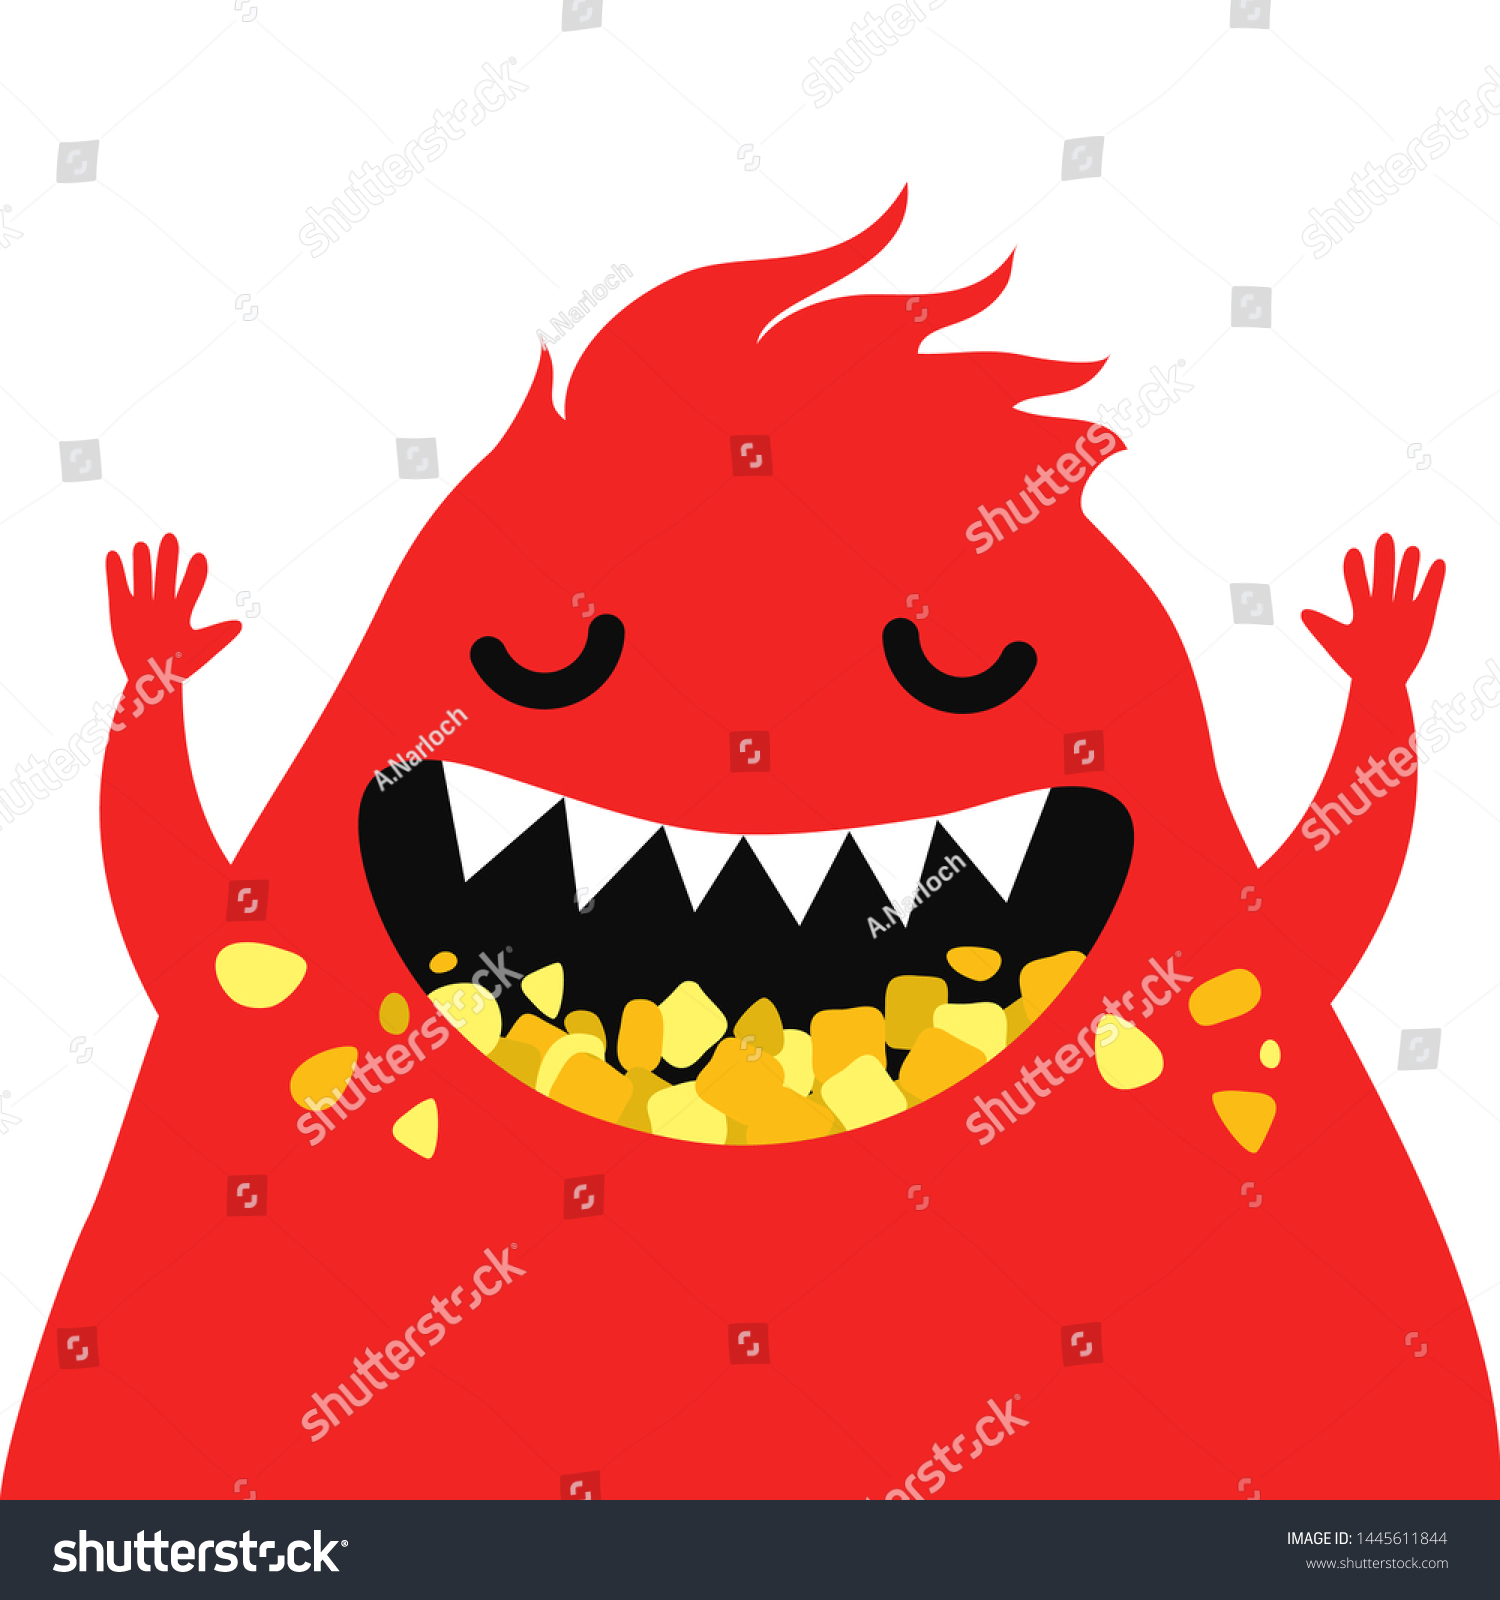 SVG of Cartoon Funny Monster. Vector Illustration For Backgrounds, Logos, Stickers, Labels, Tags And Other Design. svg